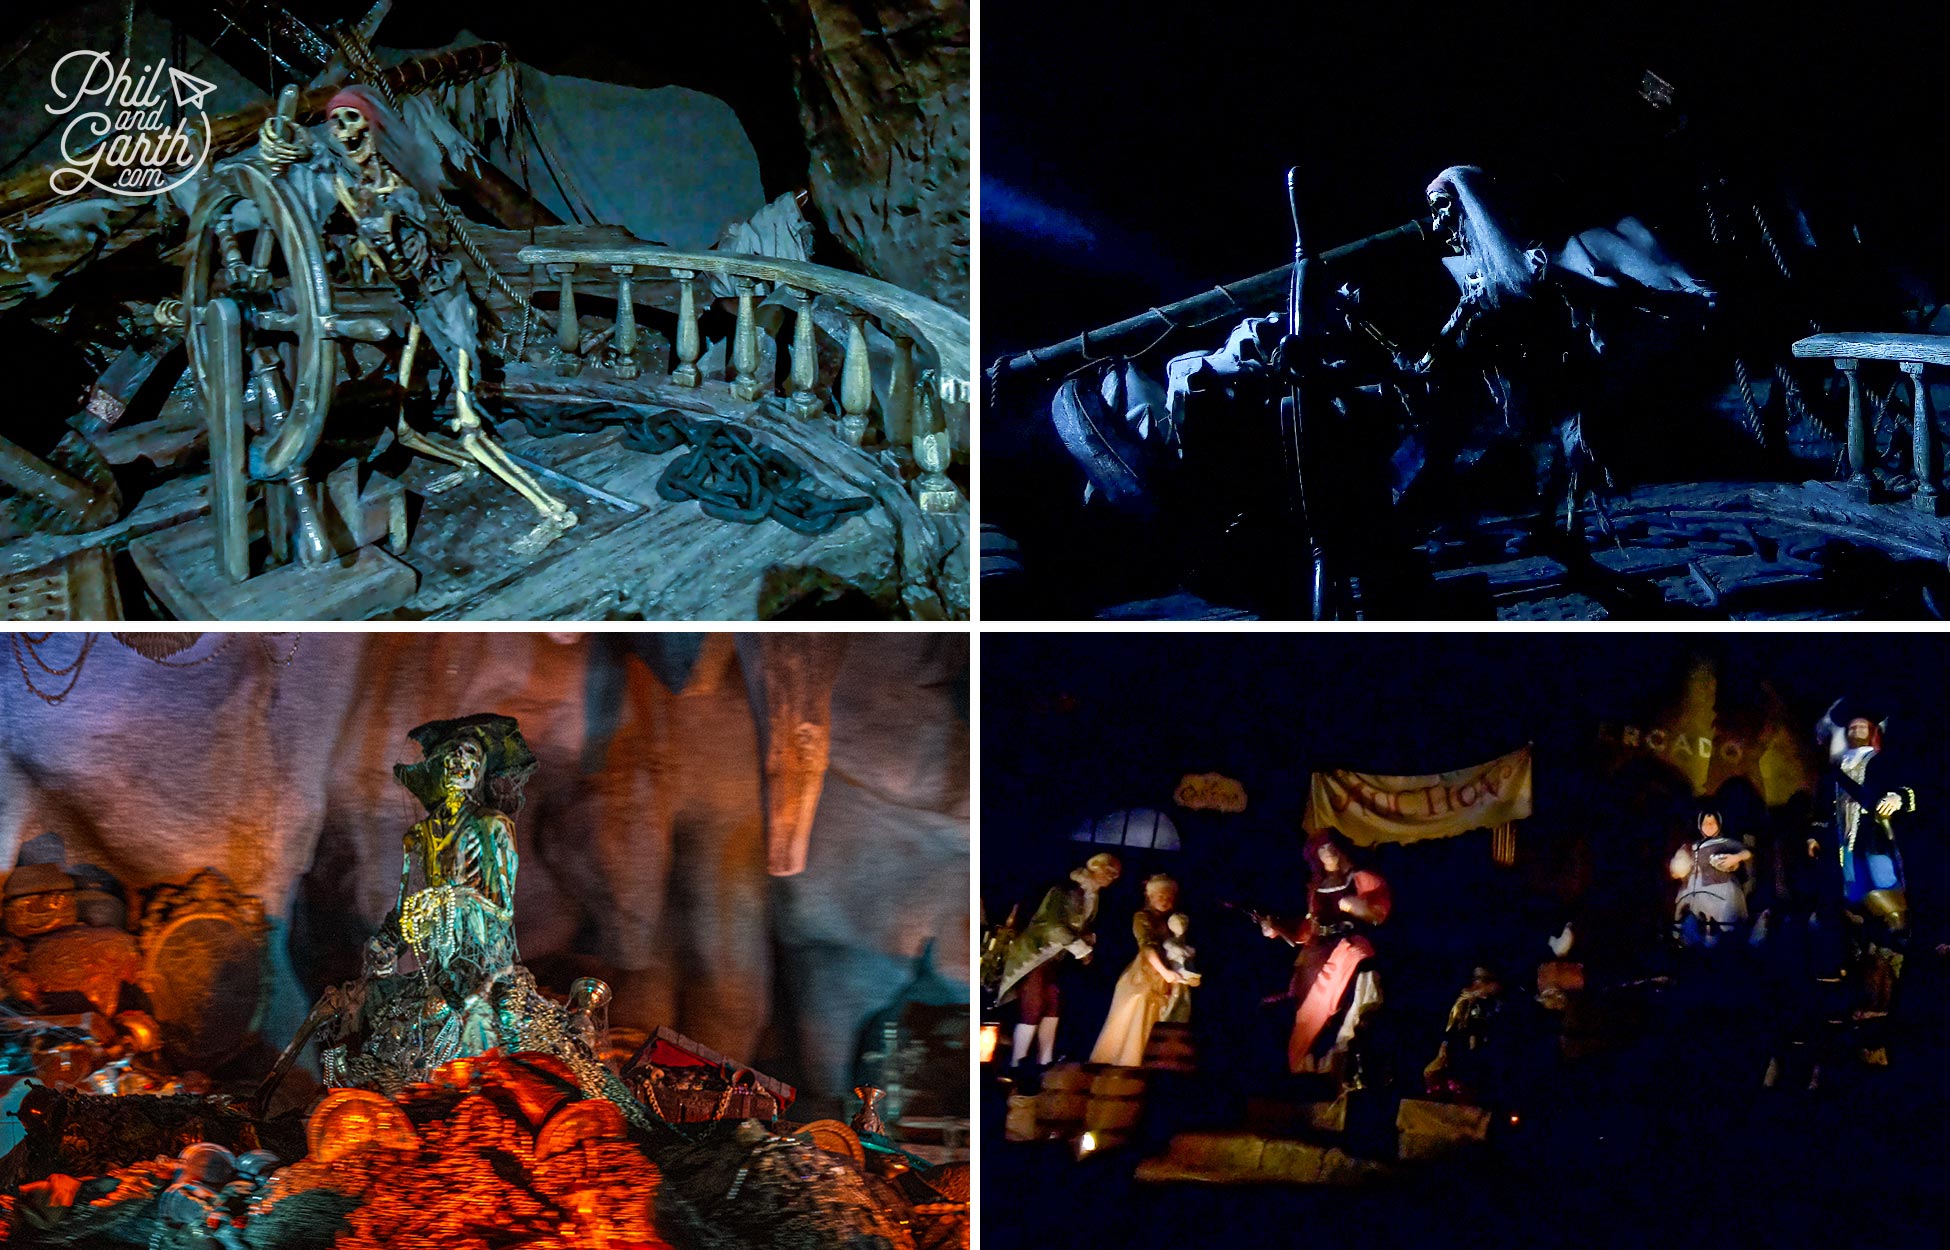 Pirates of the Caribbean - these photos don't do it any justice